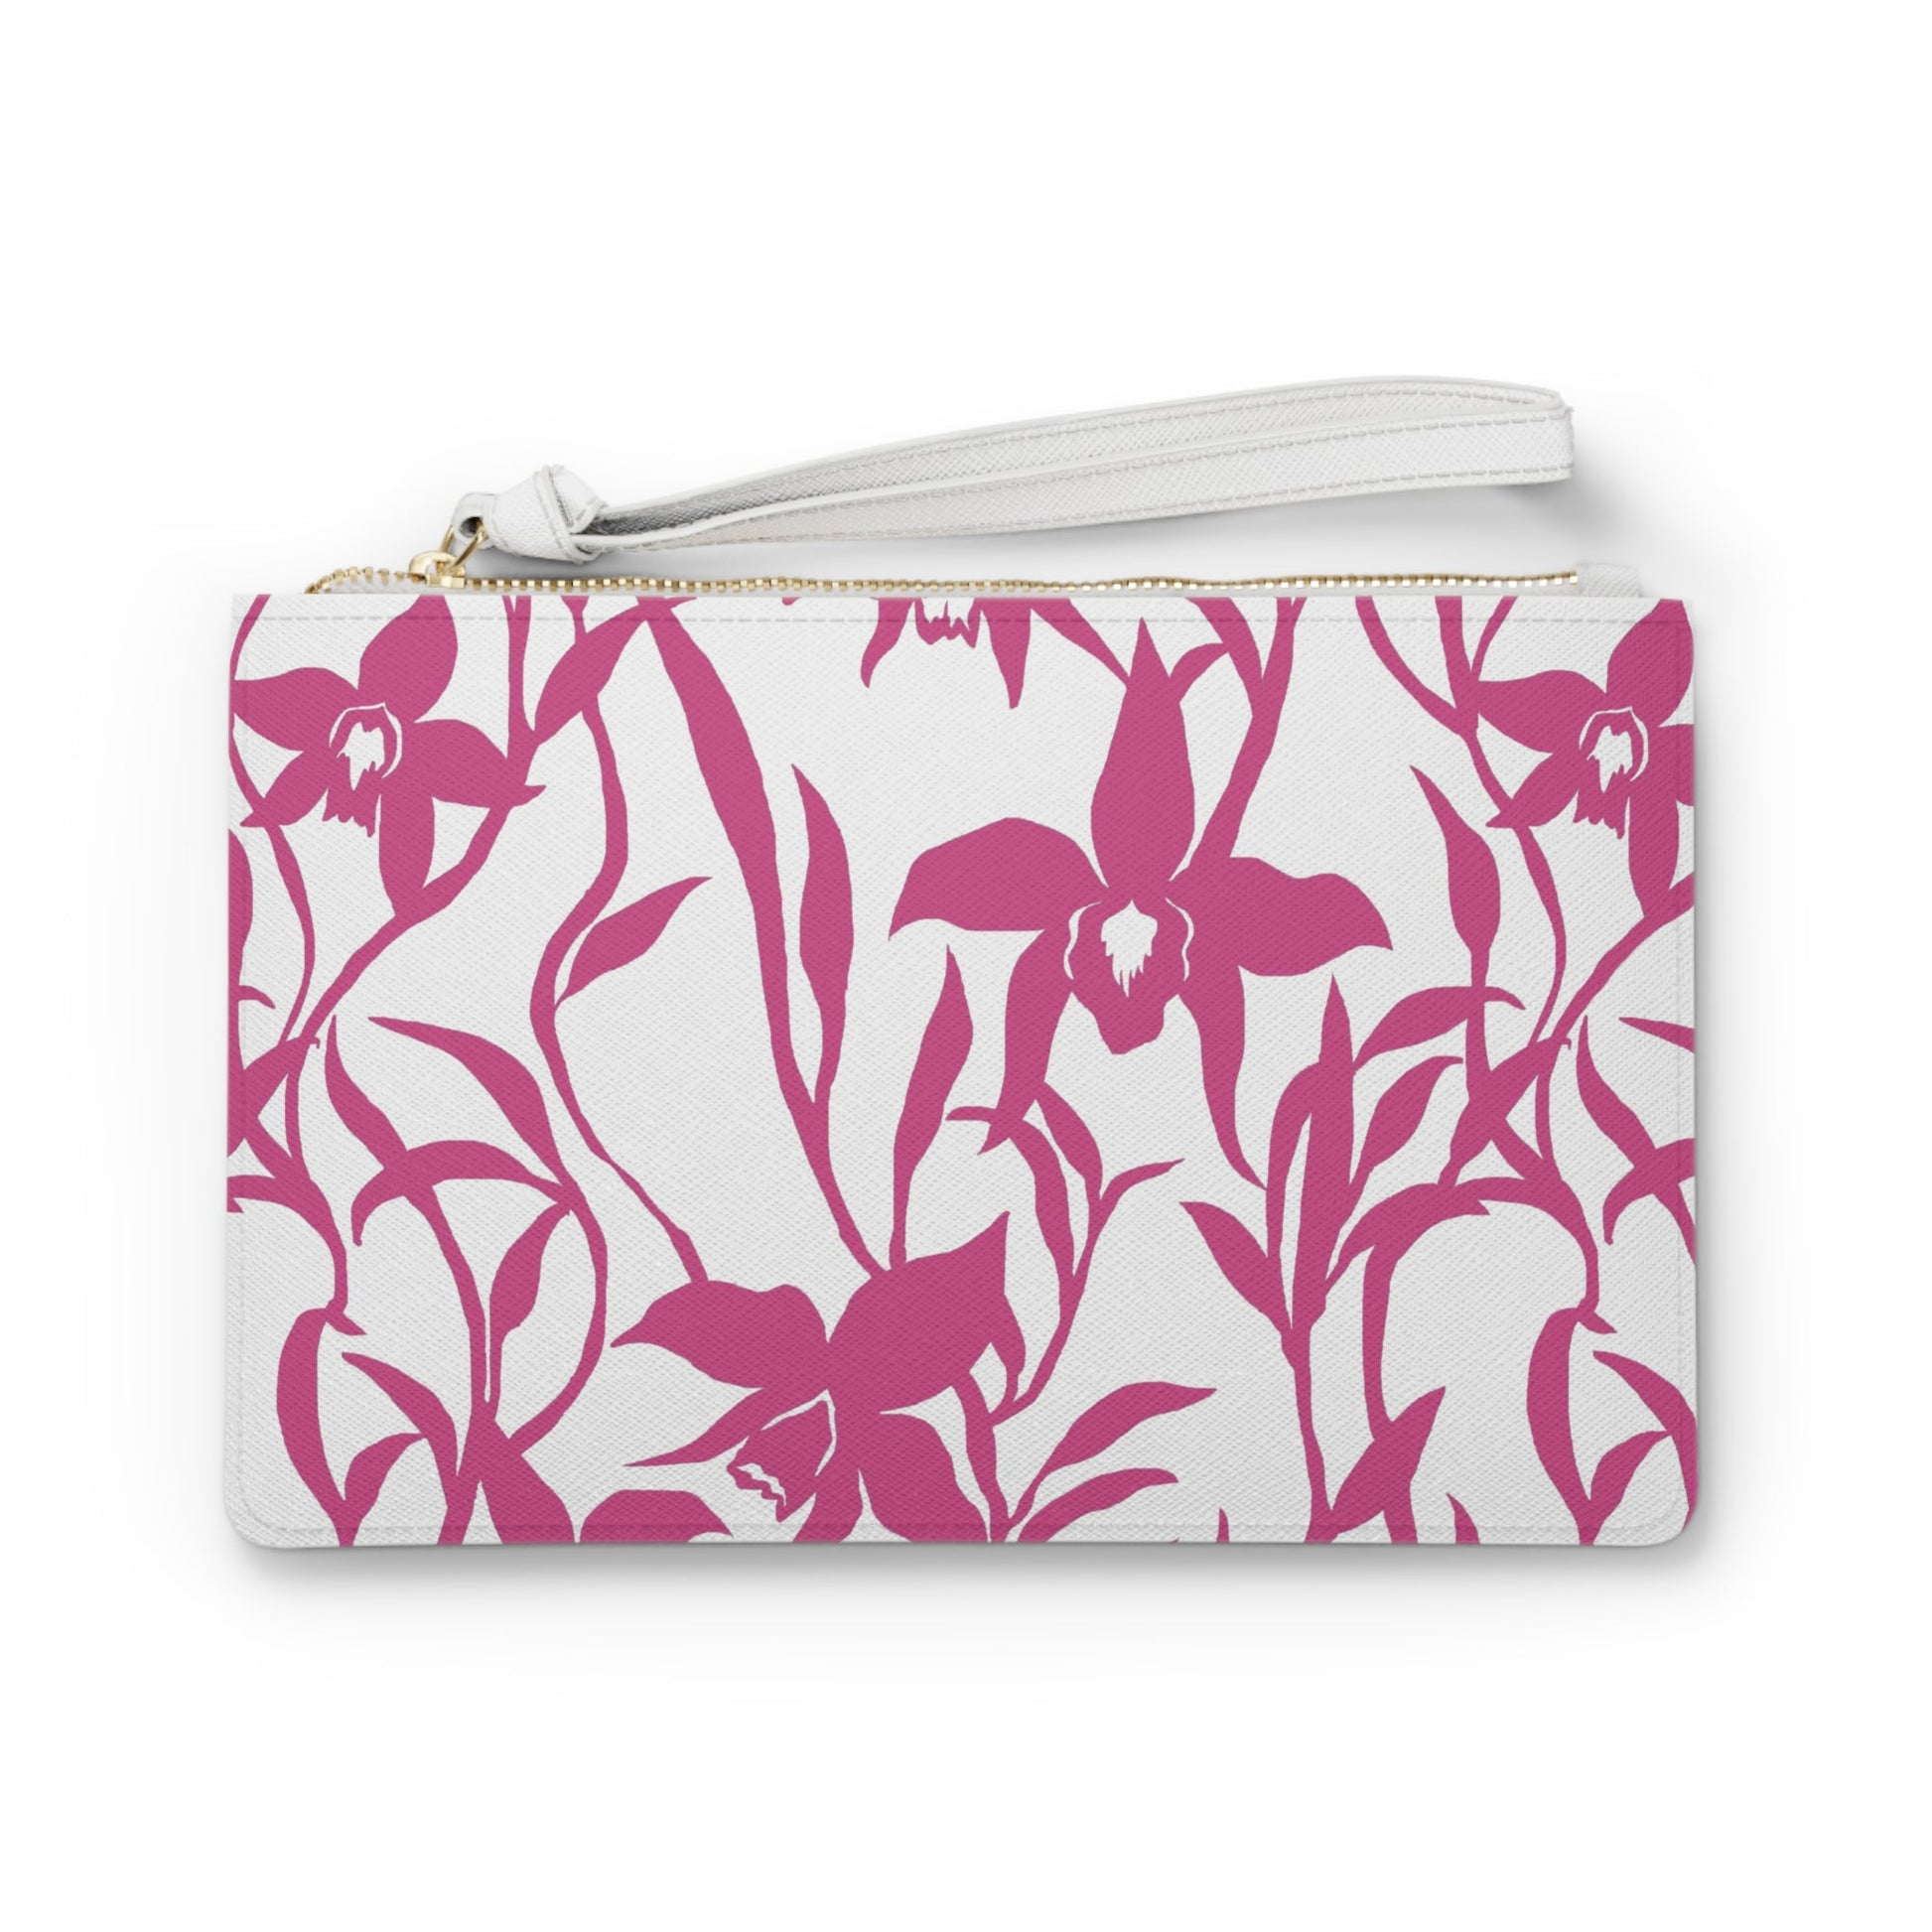 Vegan Clutch Bag Orchid Whimsy Pink - Global Village Kailua Boutique